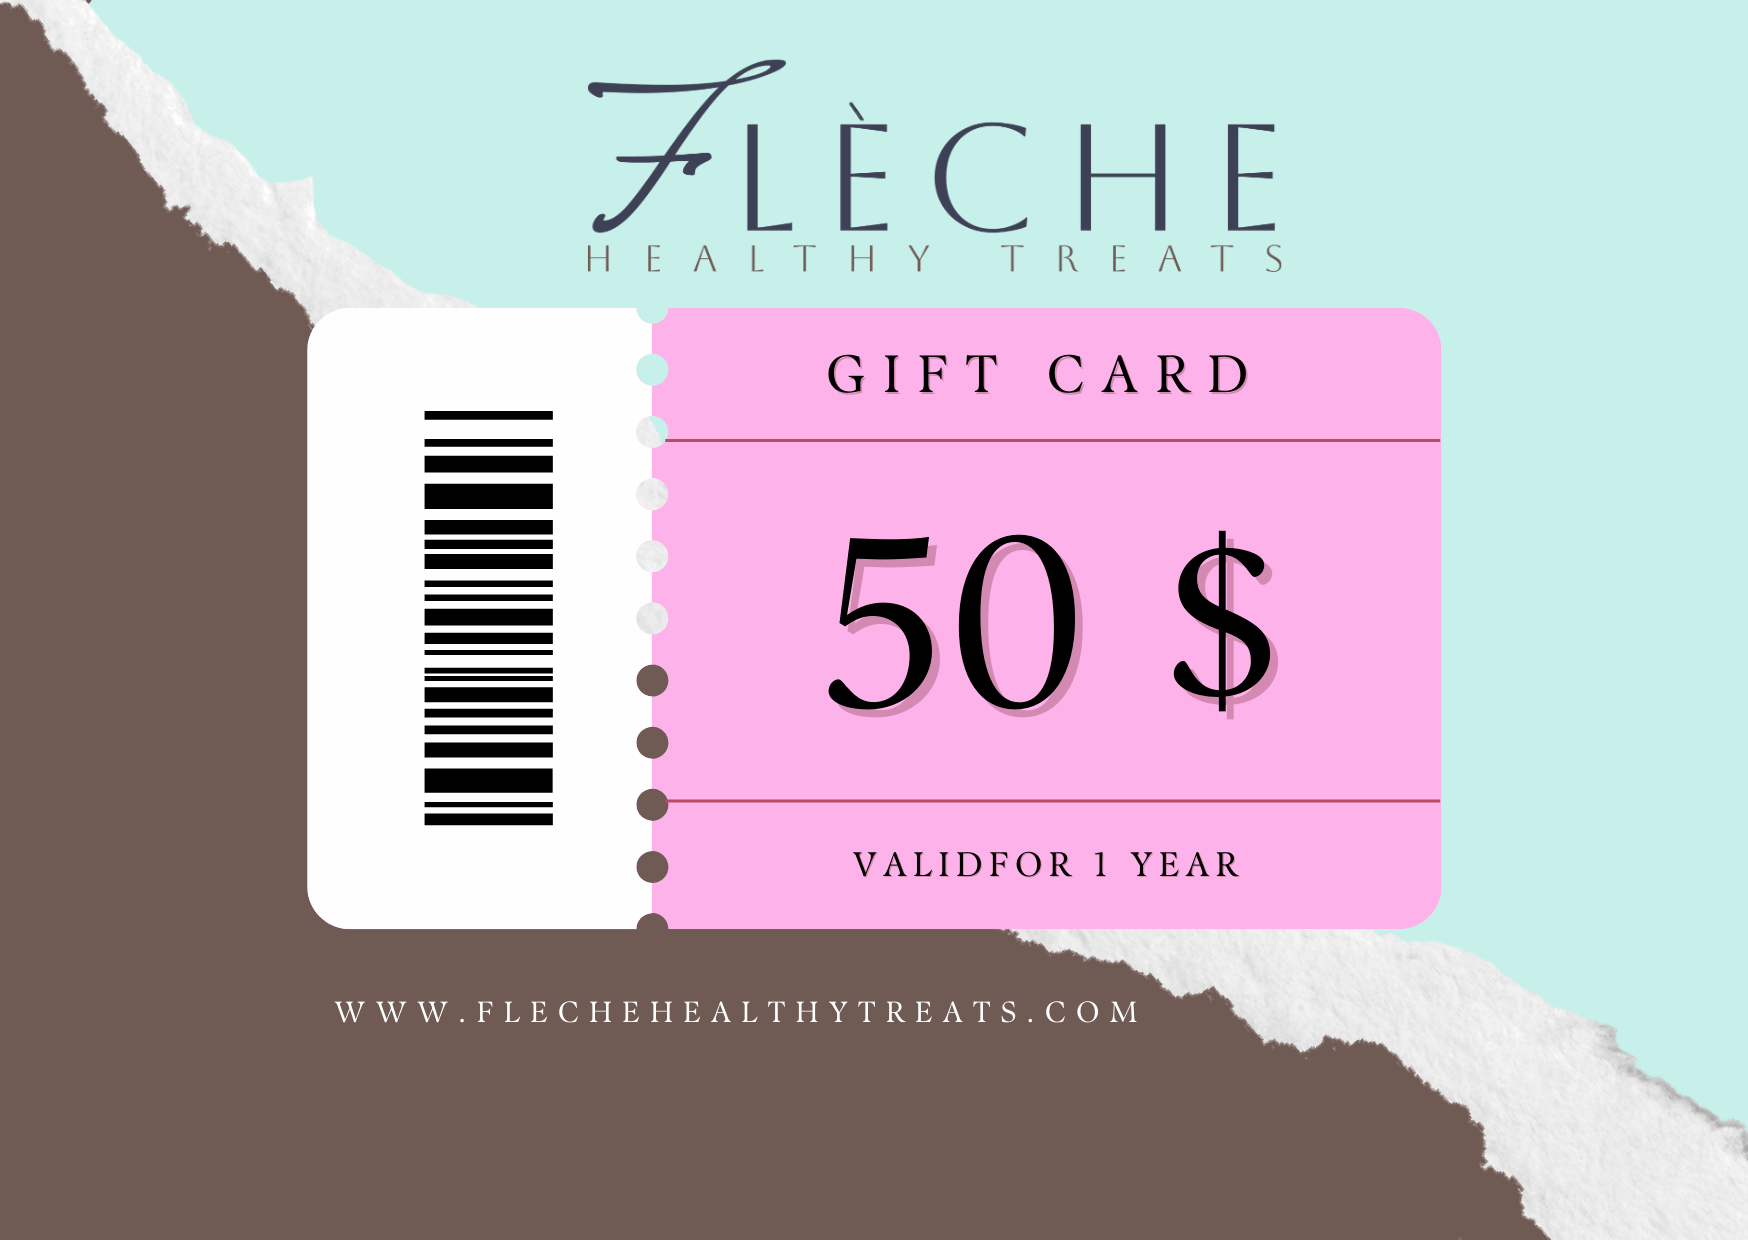 Gift Cards - Delightful and Nutritious Presents - Fleche Healthy Treats